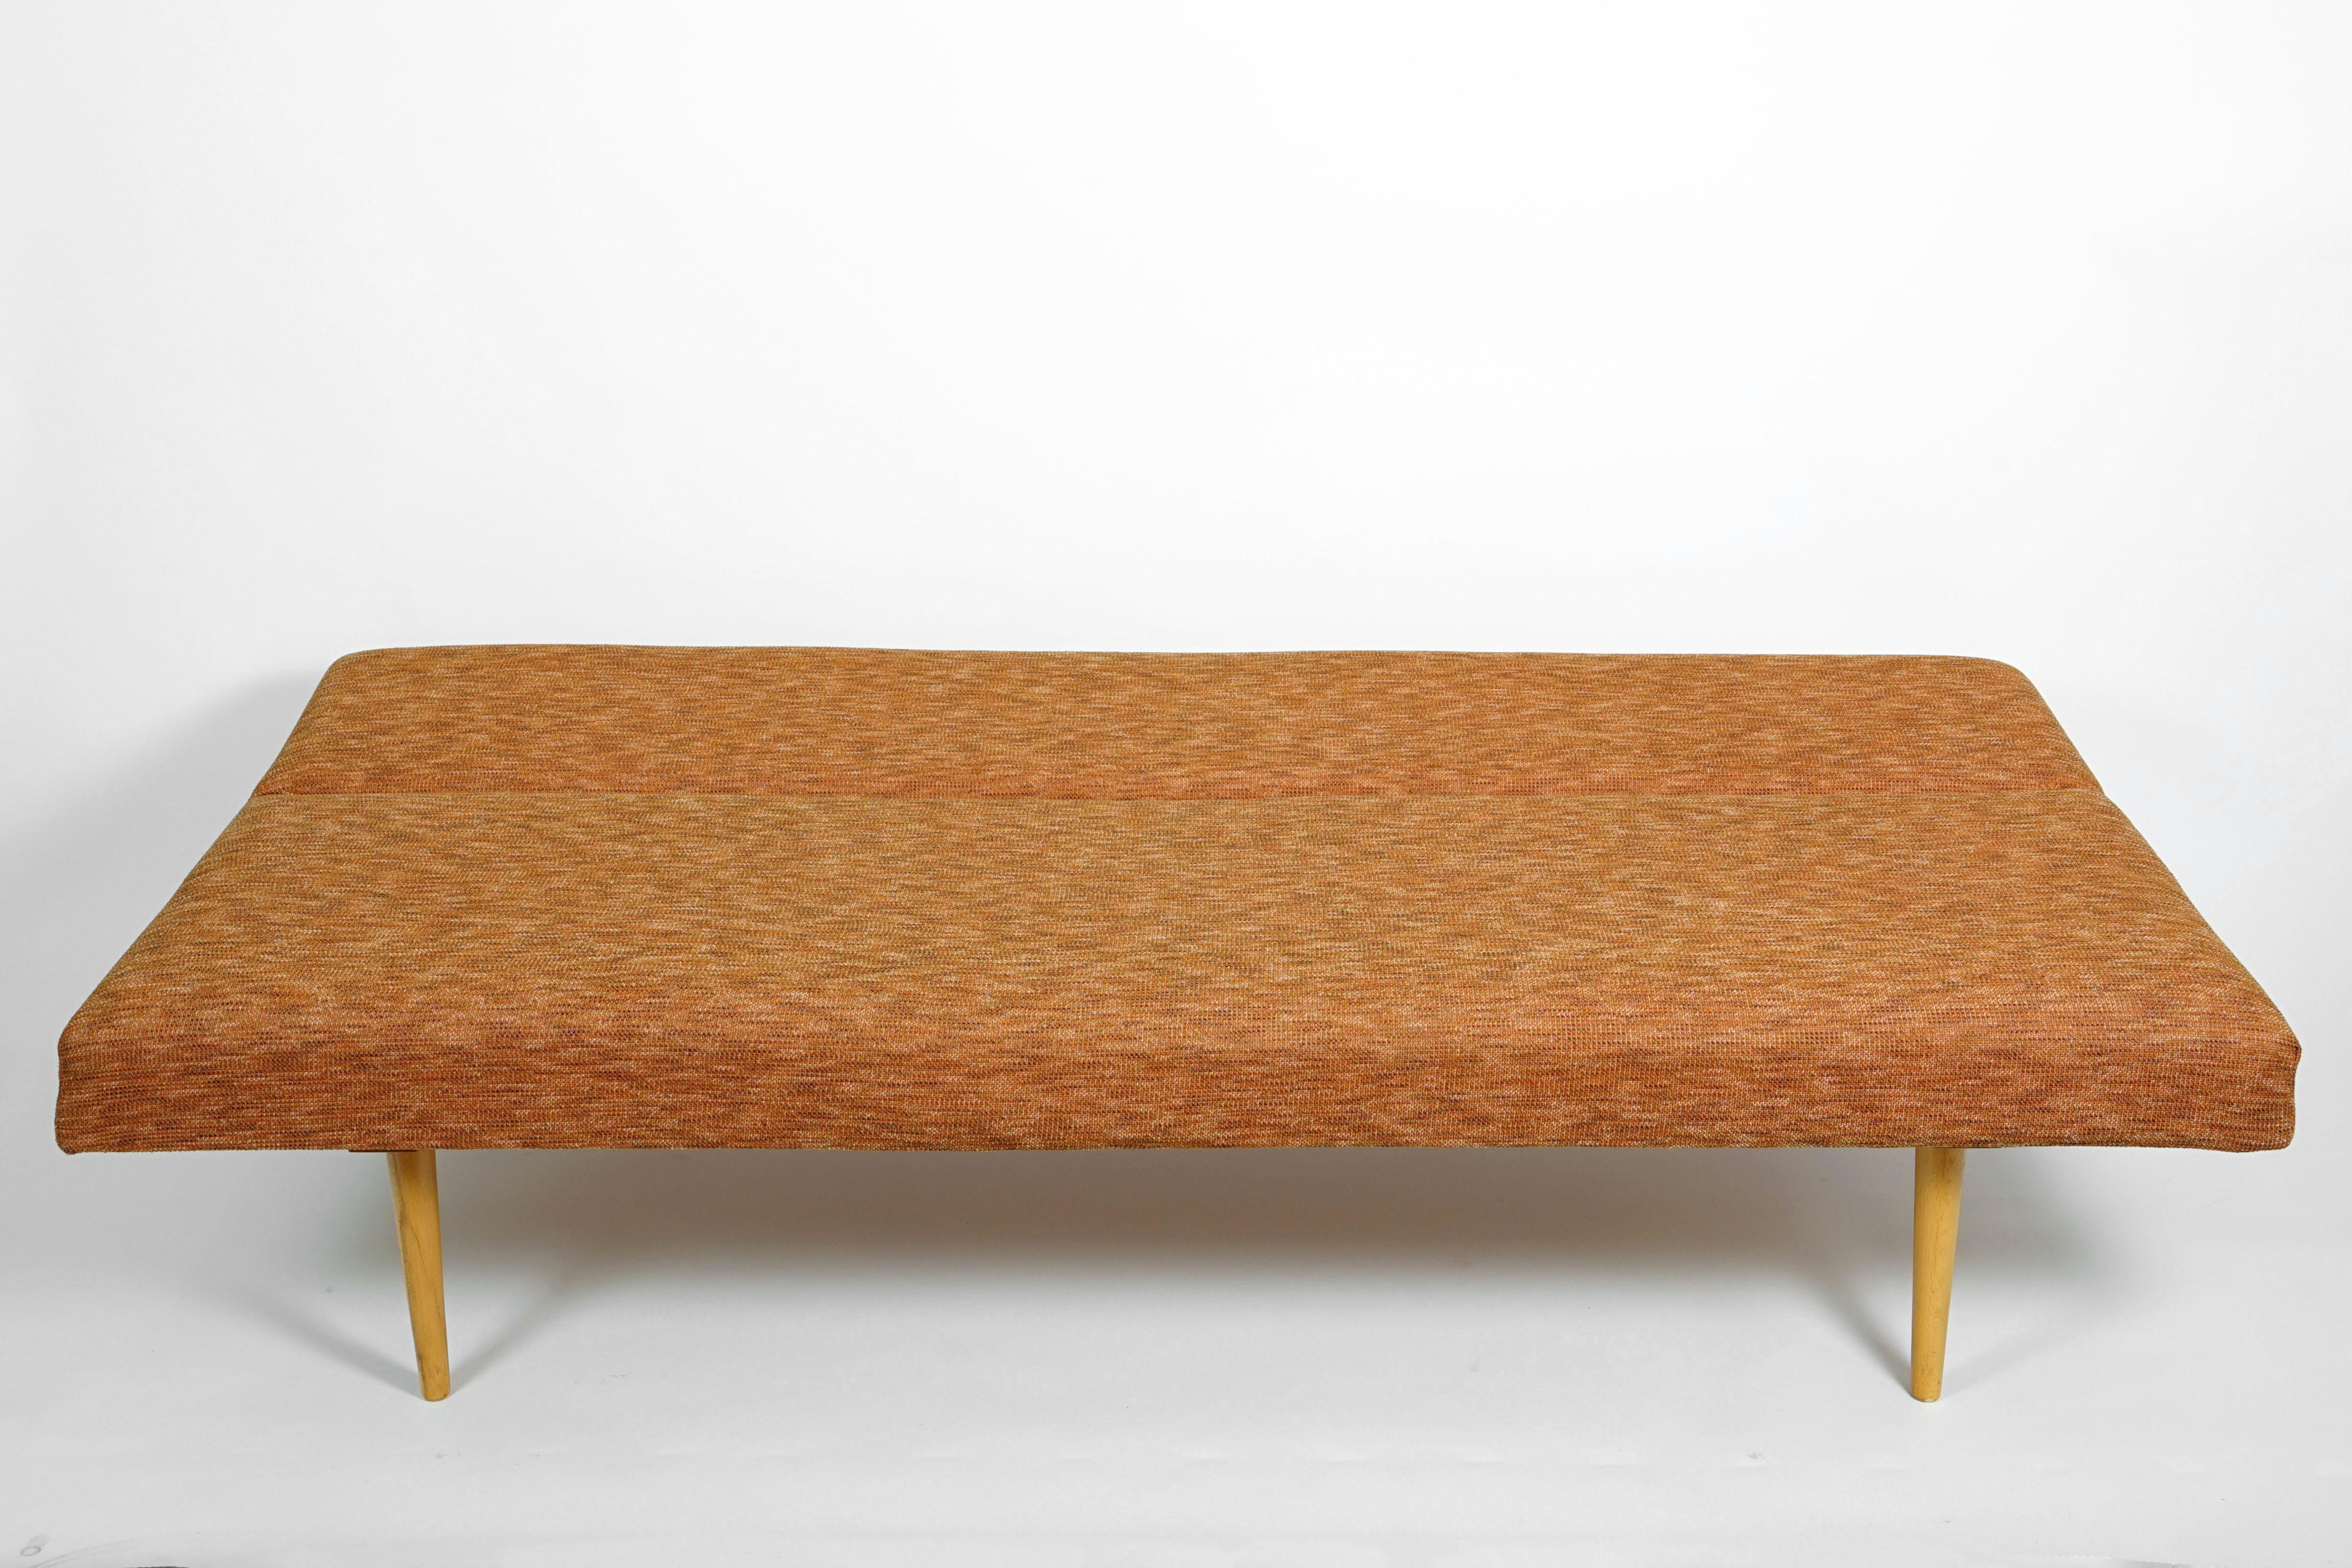 Minimalistic design of this 1960s Sofa from Miroslav Navratil for Czech furniture manufacturer Praha Interier.
The daybed has been orange reupholstered.
The practical midcentury sofa can easily be used as a bed. Measures: 90cm x 180cm
Wooden